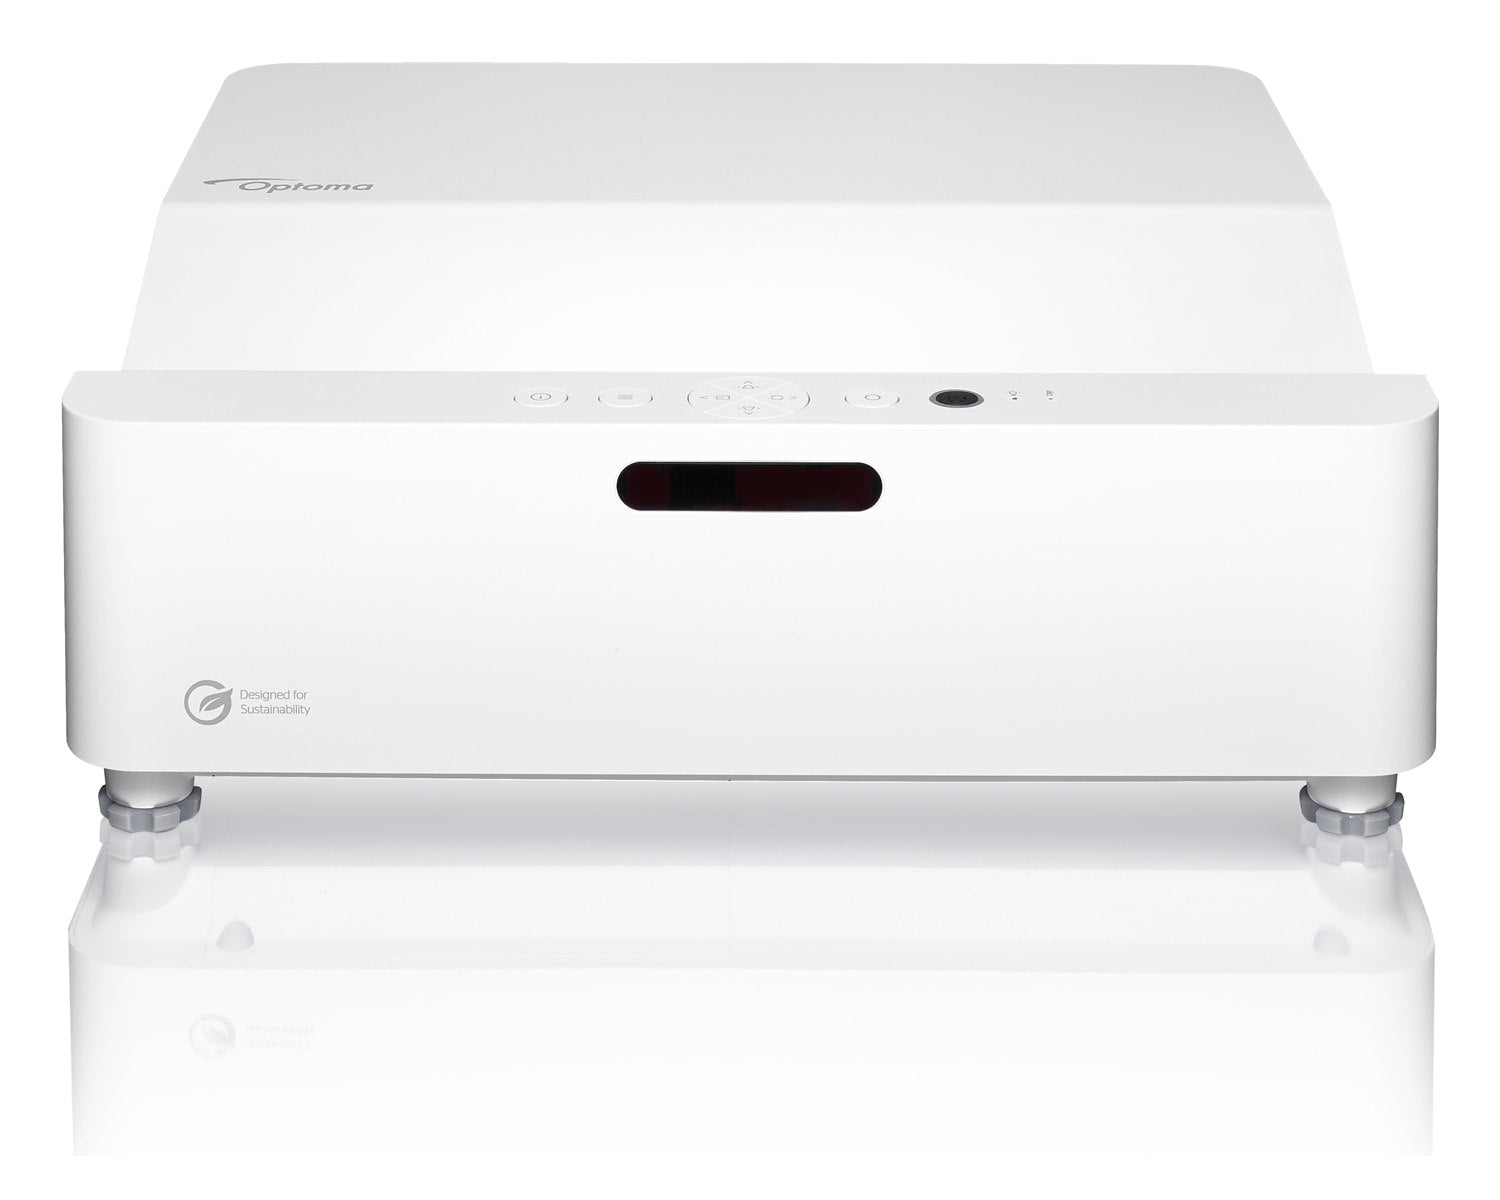 Optoma GT3500HDR Full HD 1080p Laser ultra-close projector